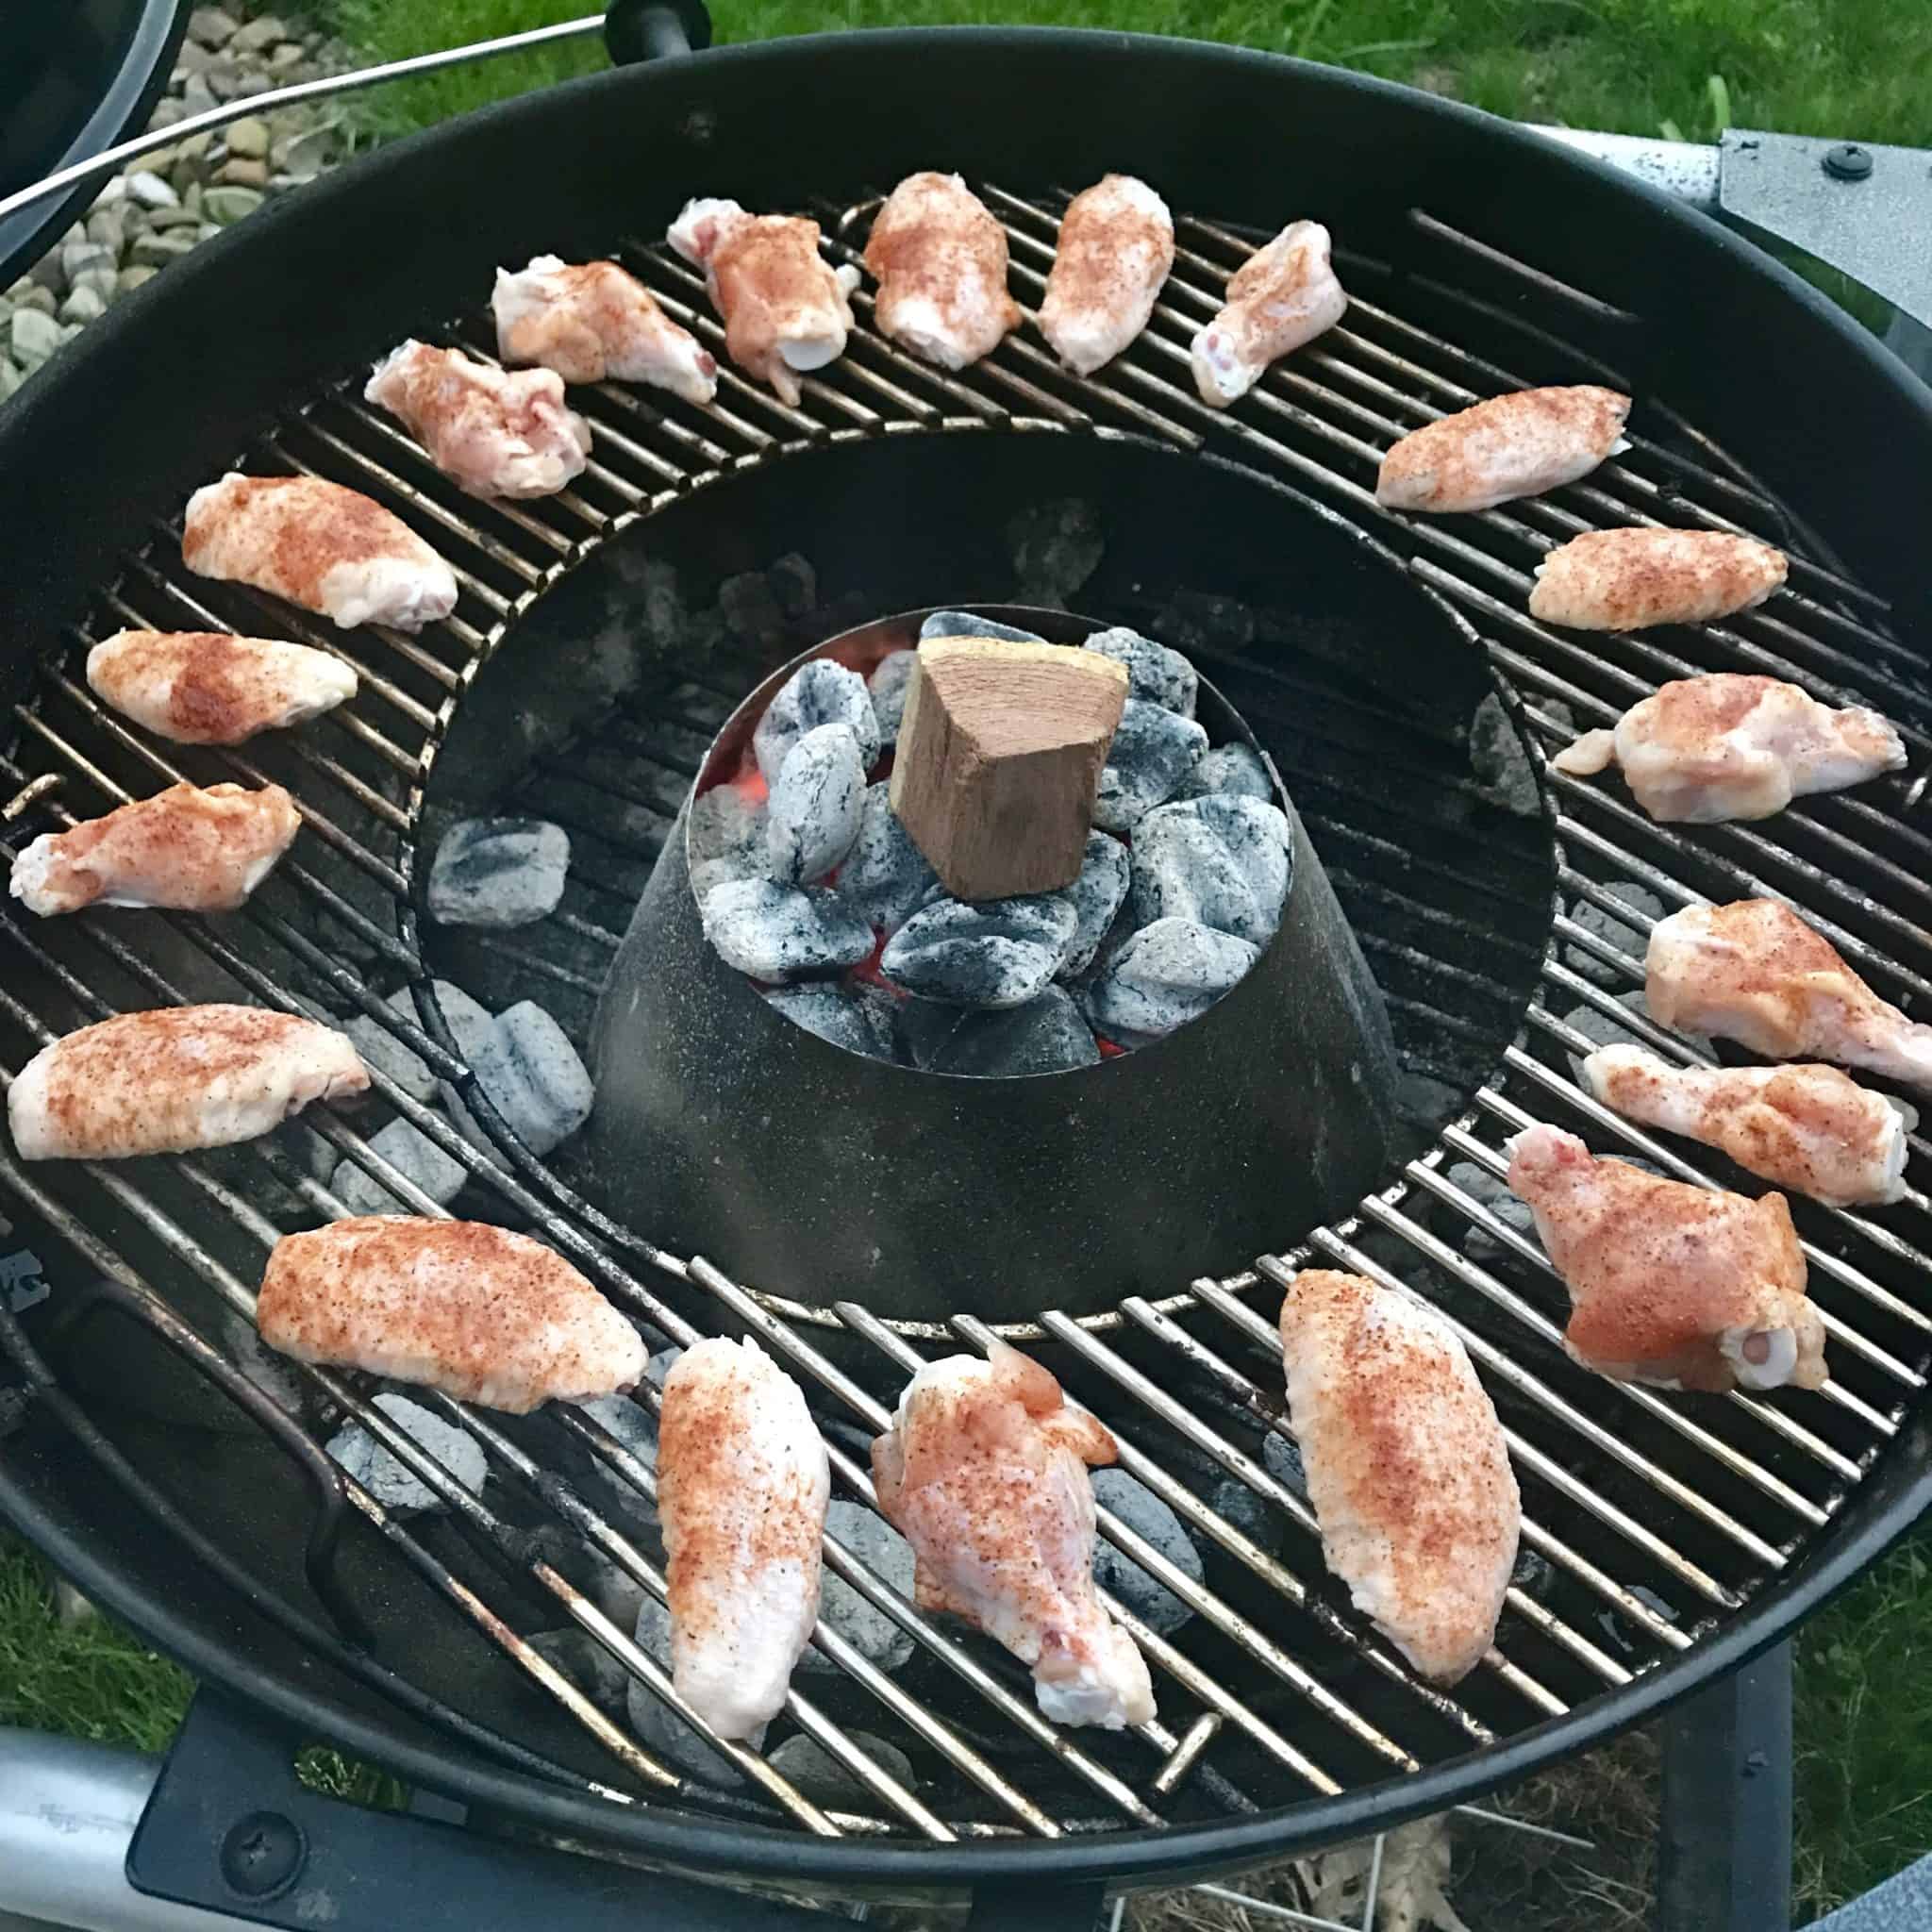 Chicken wings arranged in organized circle on weber grill with vortex in center